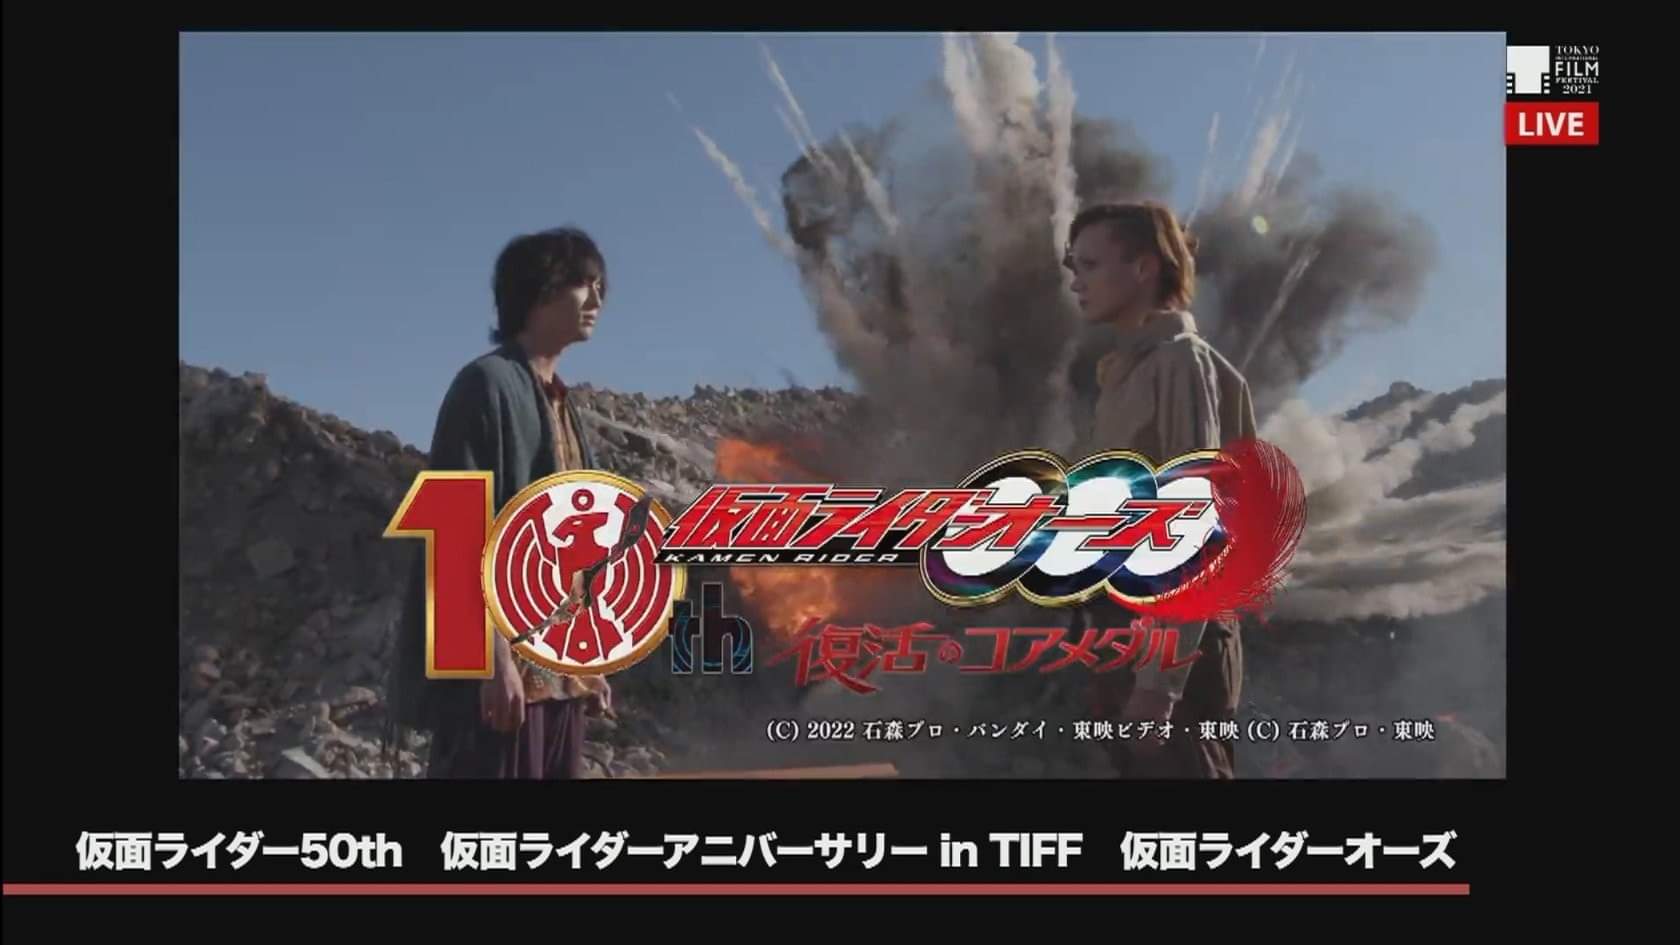 Core Medal of Resurrection Promotional Poster Kamen Rider OOO 10th